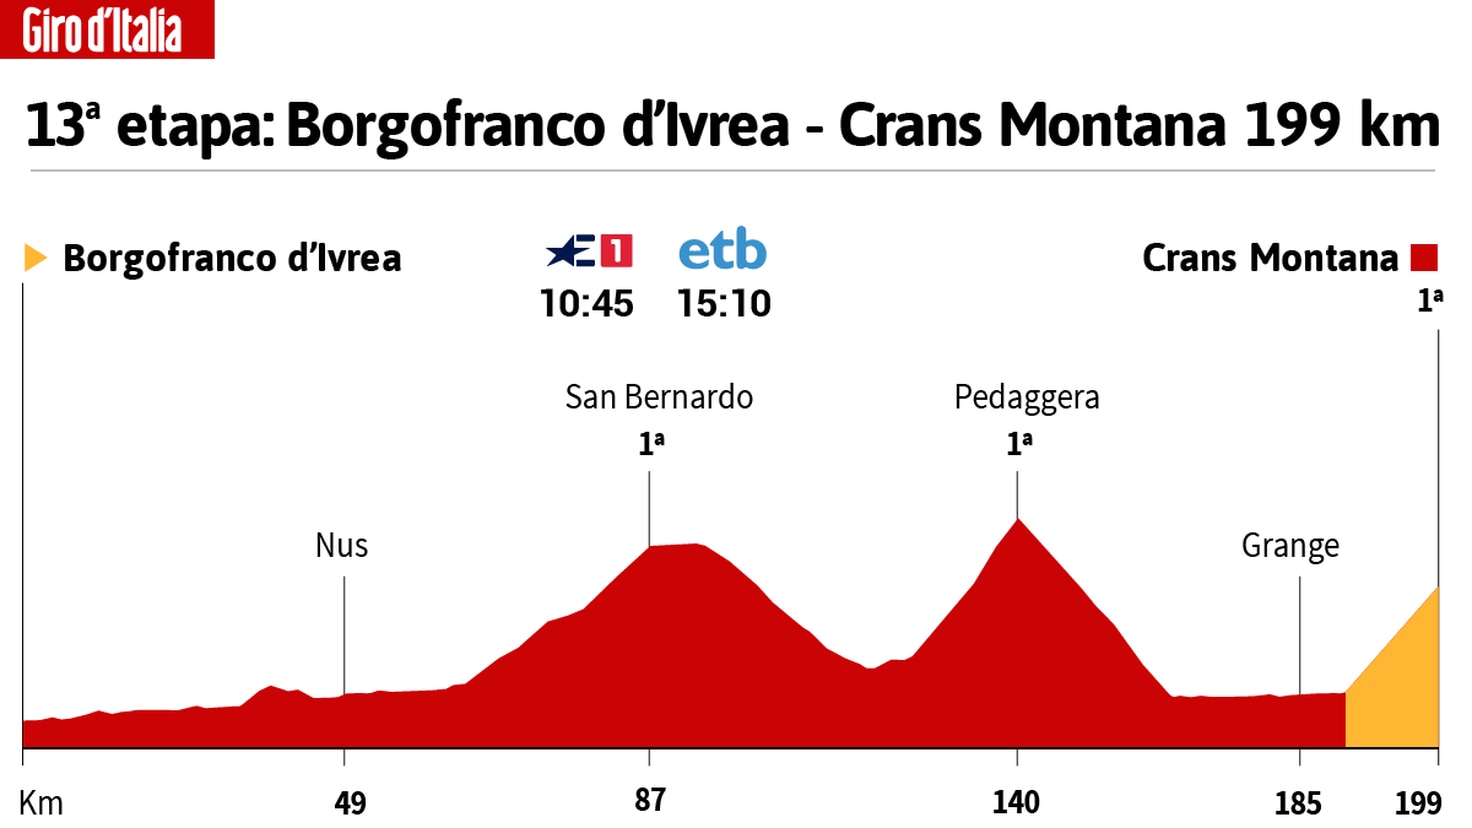 Giro d'Italia today, stage 13: schedule, profile and route
